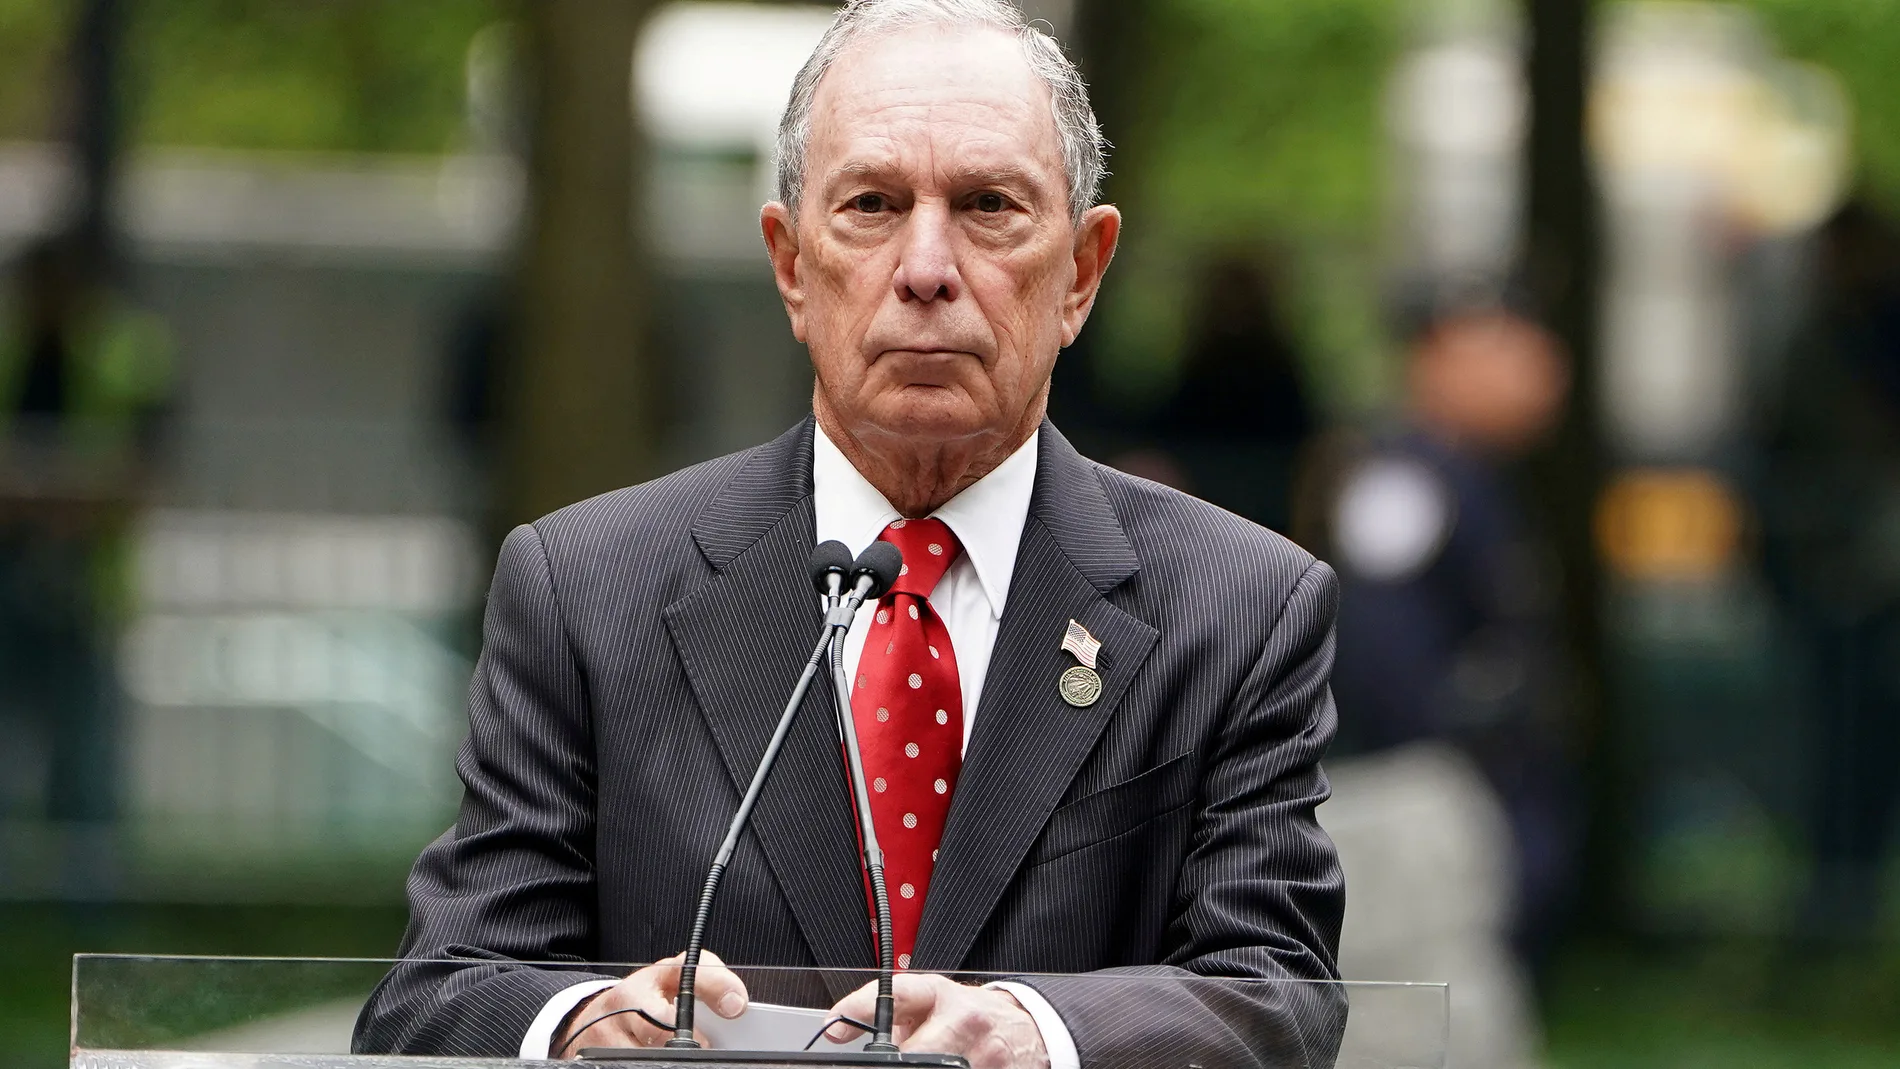 FILE PHOTO: Former Mayor Michael Bloomberg speaks at the dedication ceremony of the Memorial Glade at the 9/11 Memorial site in the Manhattan borough of New York